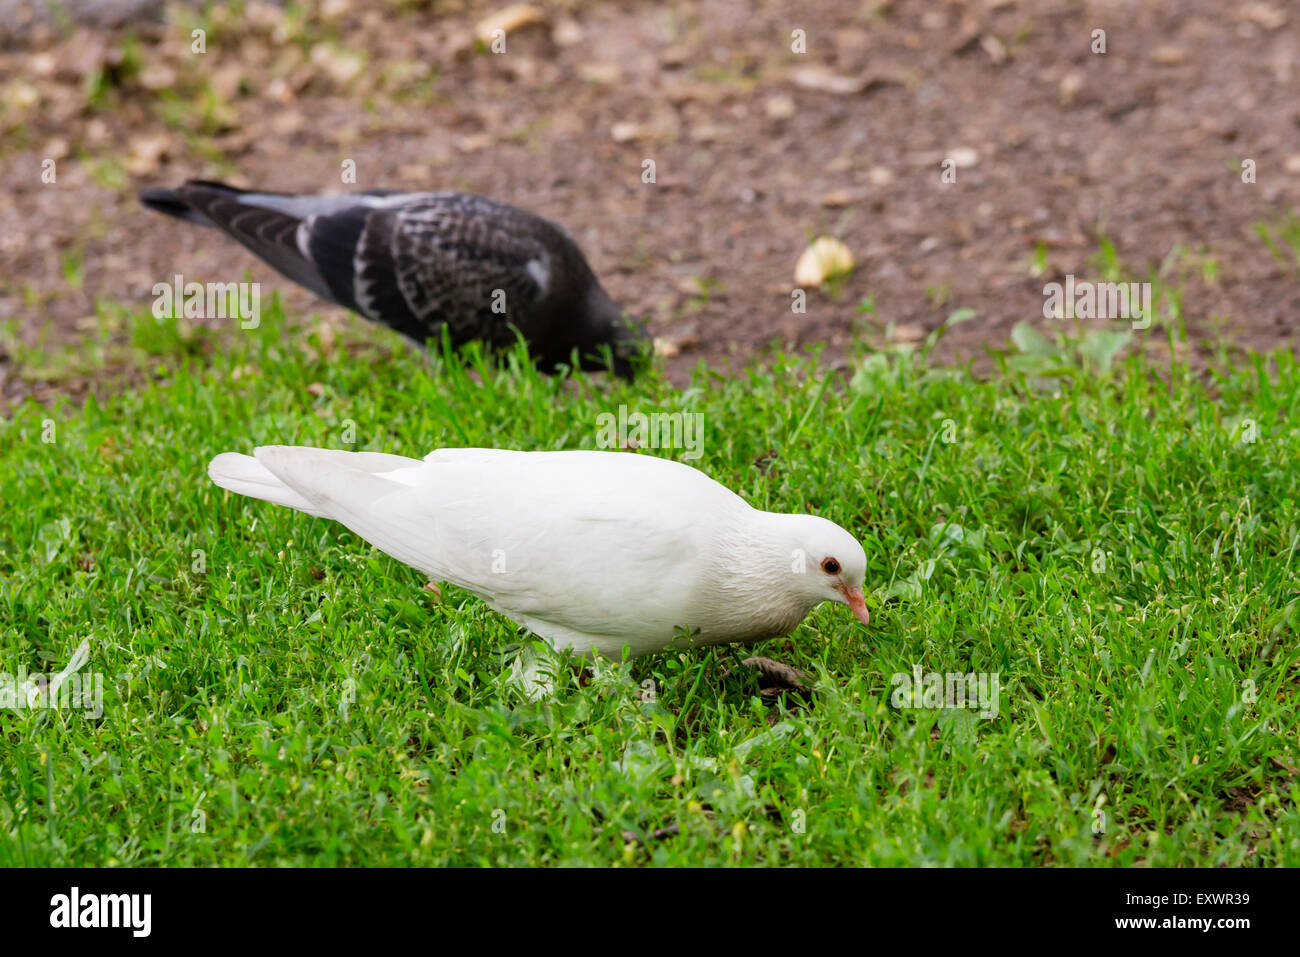 A Rare White Pigeon Standing on Green Grass with a Dark Pigeon next to